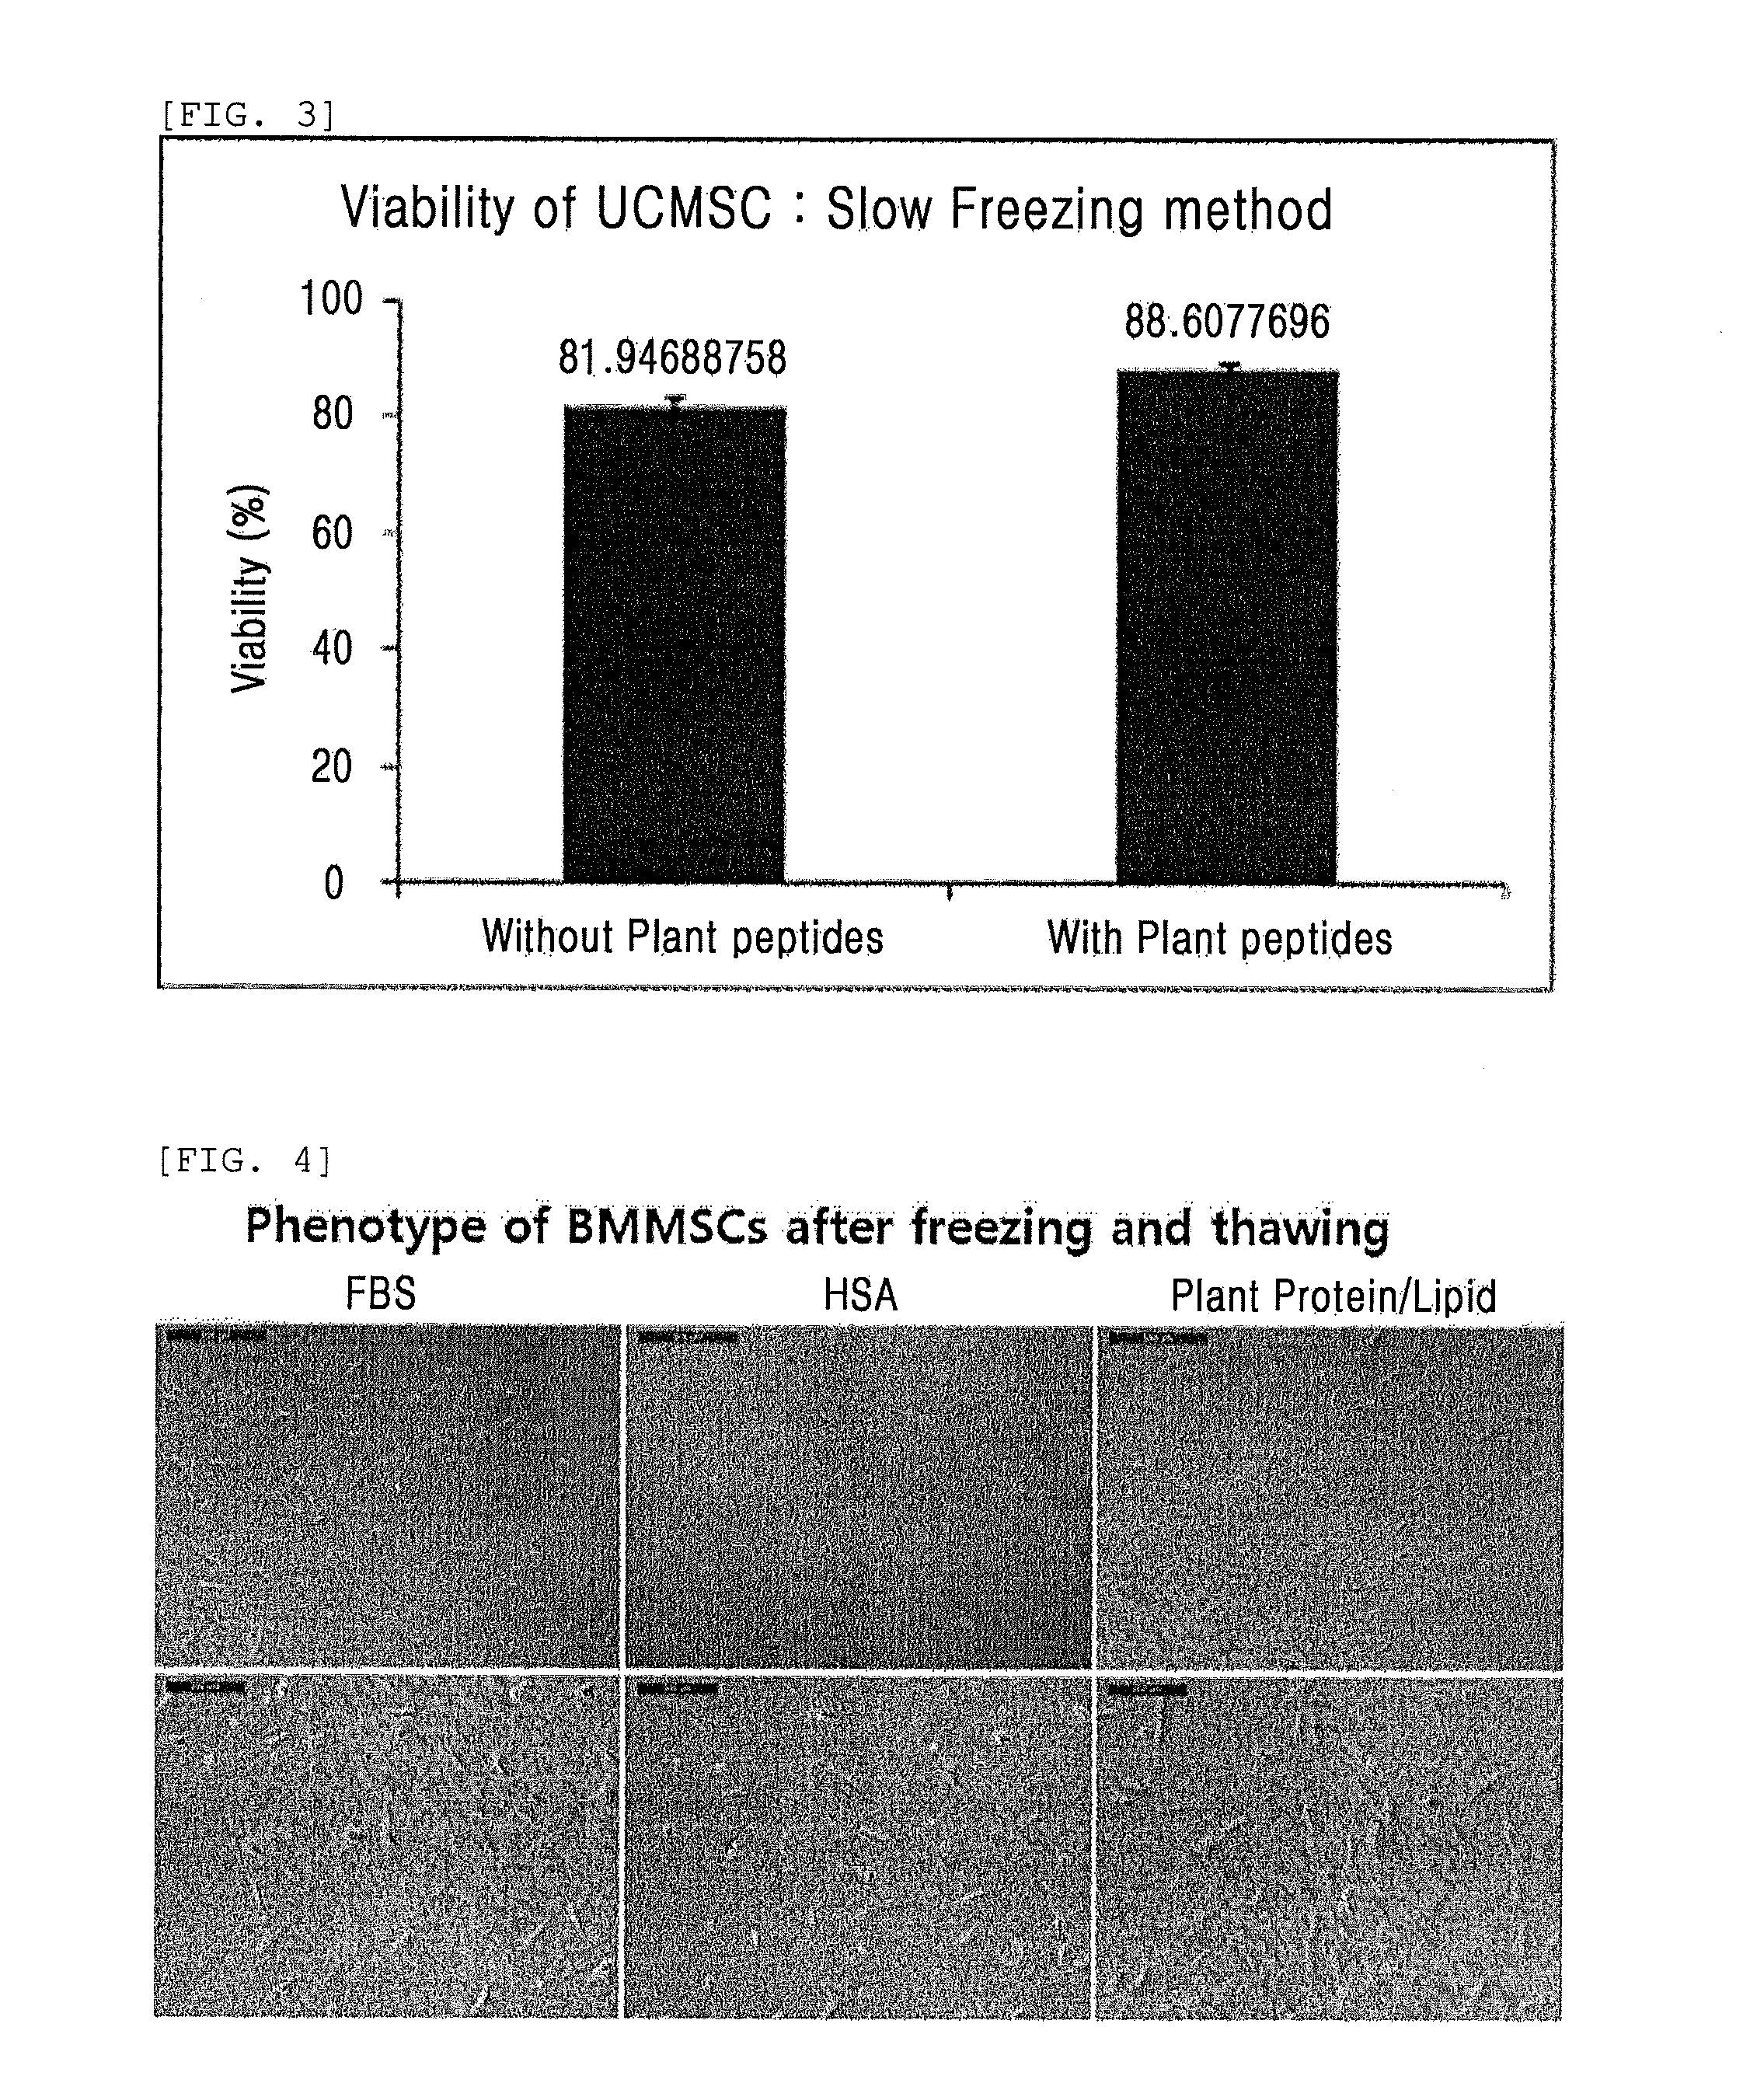 Composition comprising plant-derived recombinant human serum albumin, lipids, and plant protein hydrolysates as active ingredients for cryopreservation of stem cells or primary cells